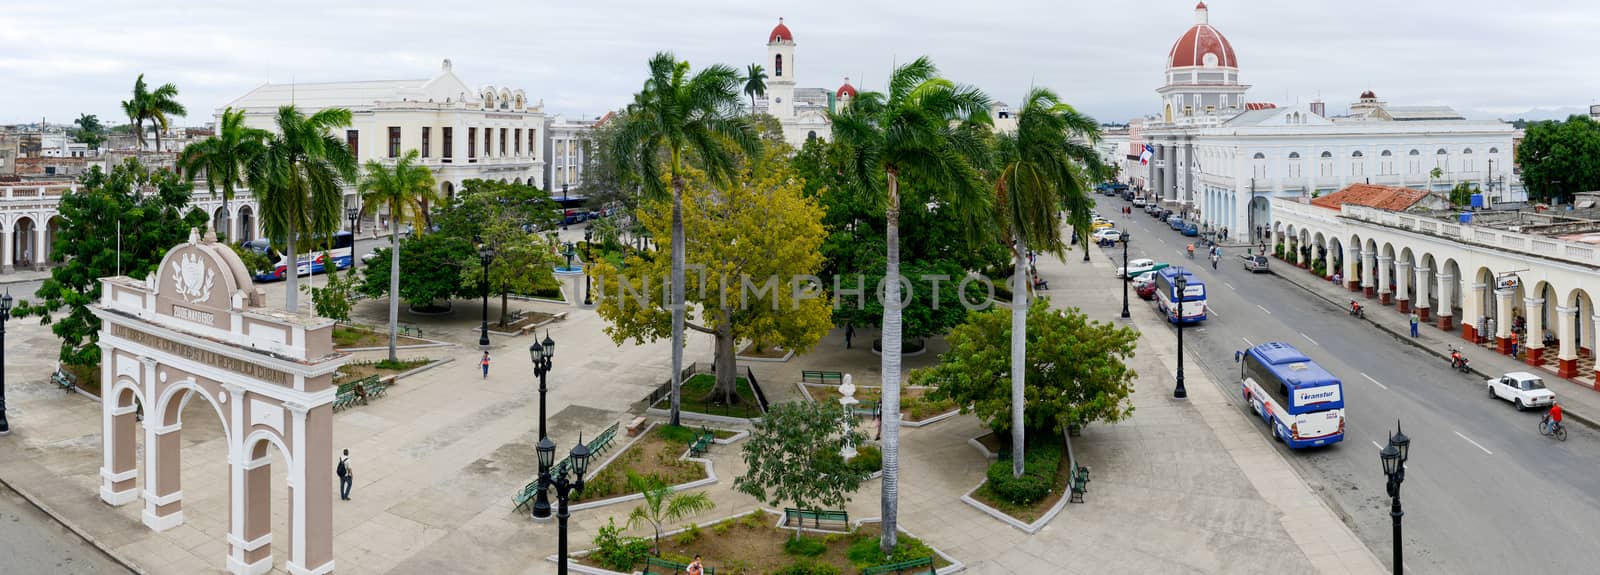 Cienfuegos, Cuba - 18 january 2016: people walking on Jose Marti park with Town Hall and Cathedral of Cienfuegos on Cuba